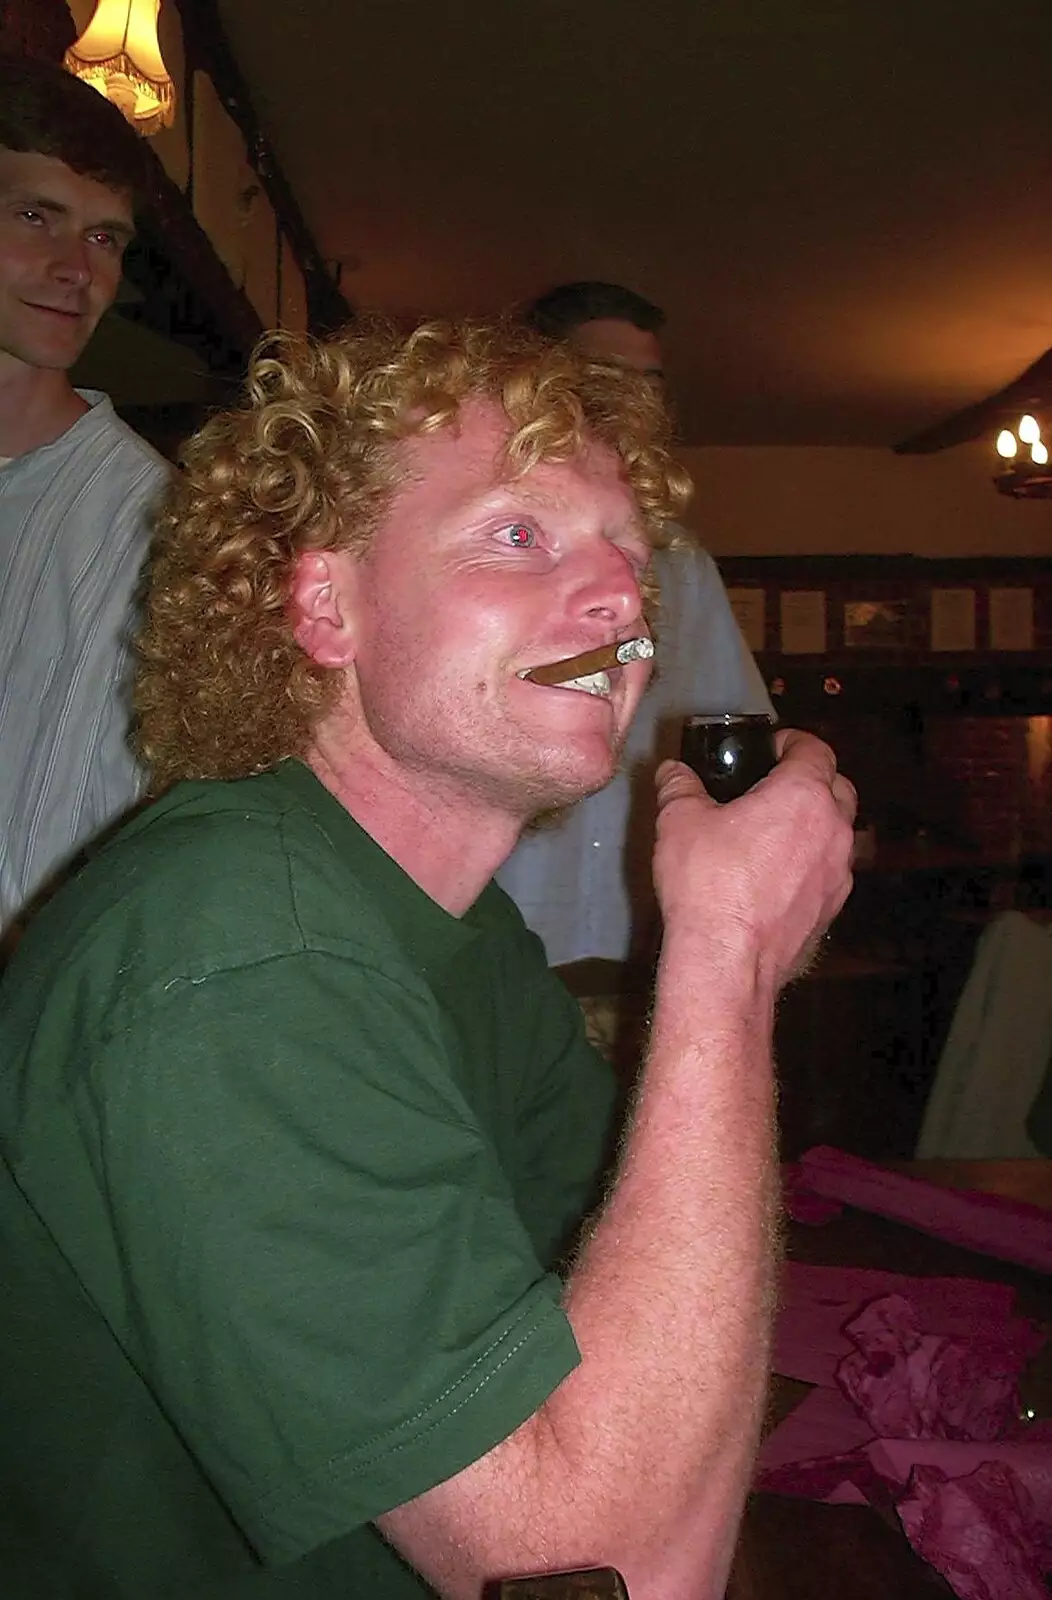 Wavy chomps on a cigar like a US Army general, from Paul's Stag Night, Brome, Scole and Bressingham - Friday 20th August 2004